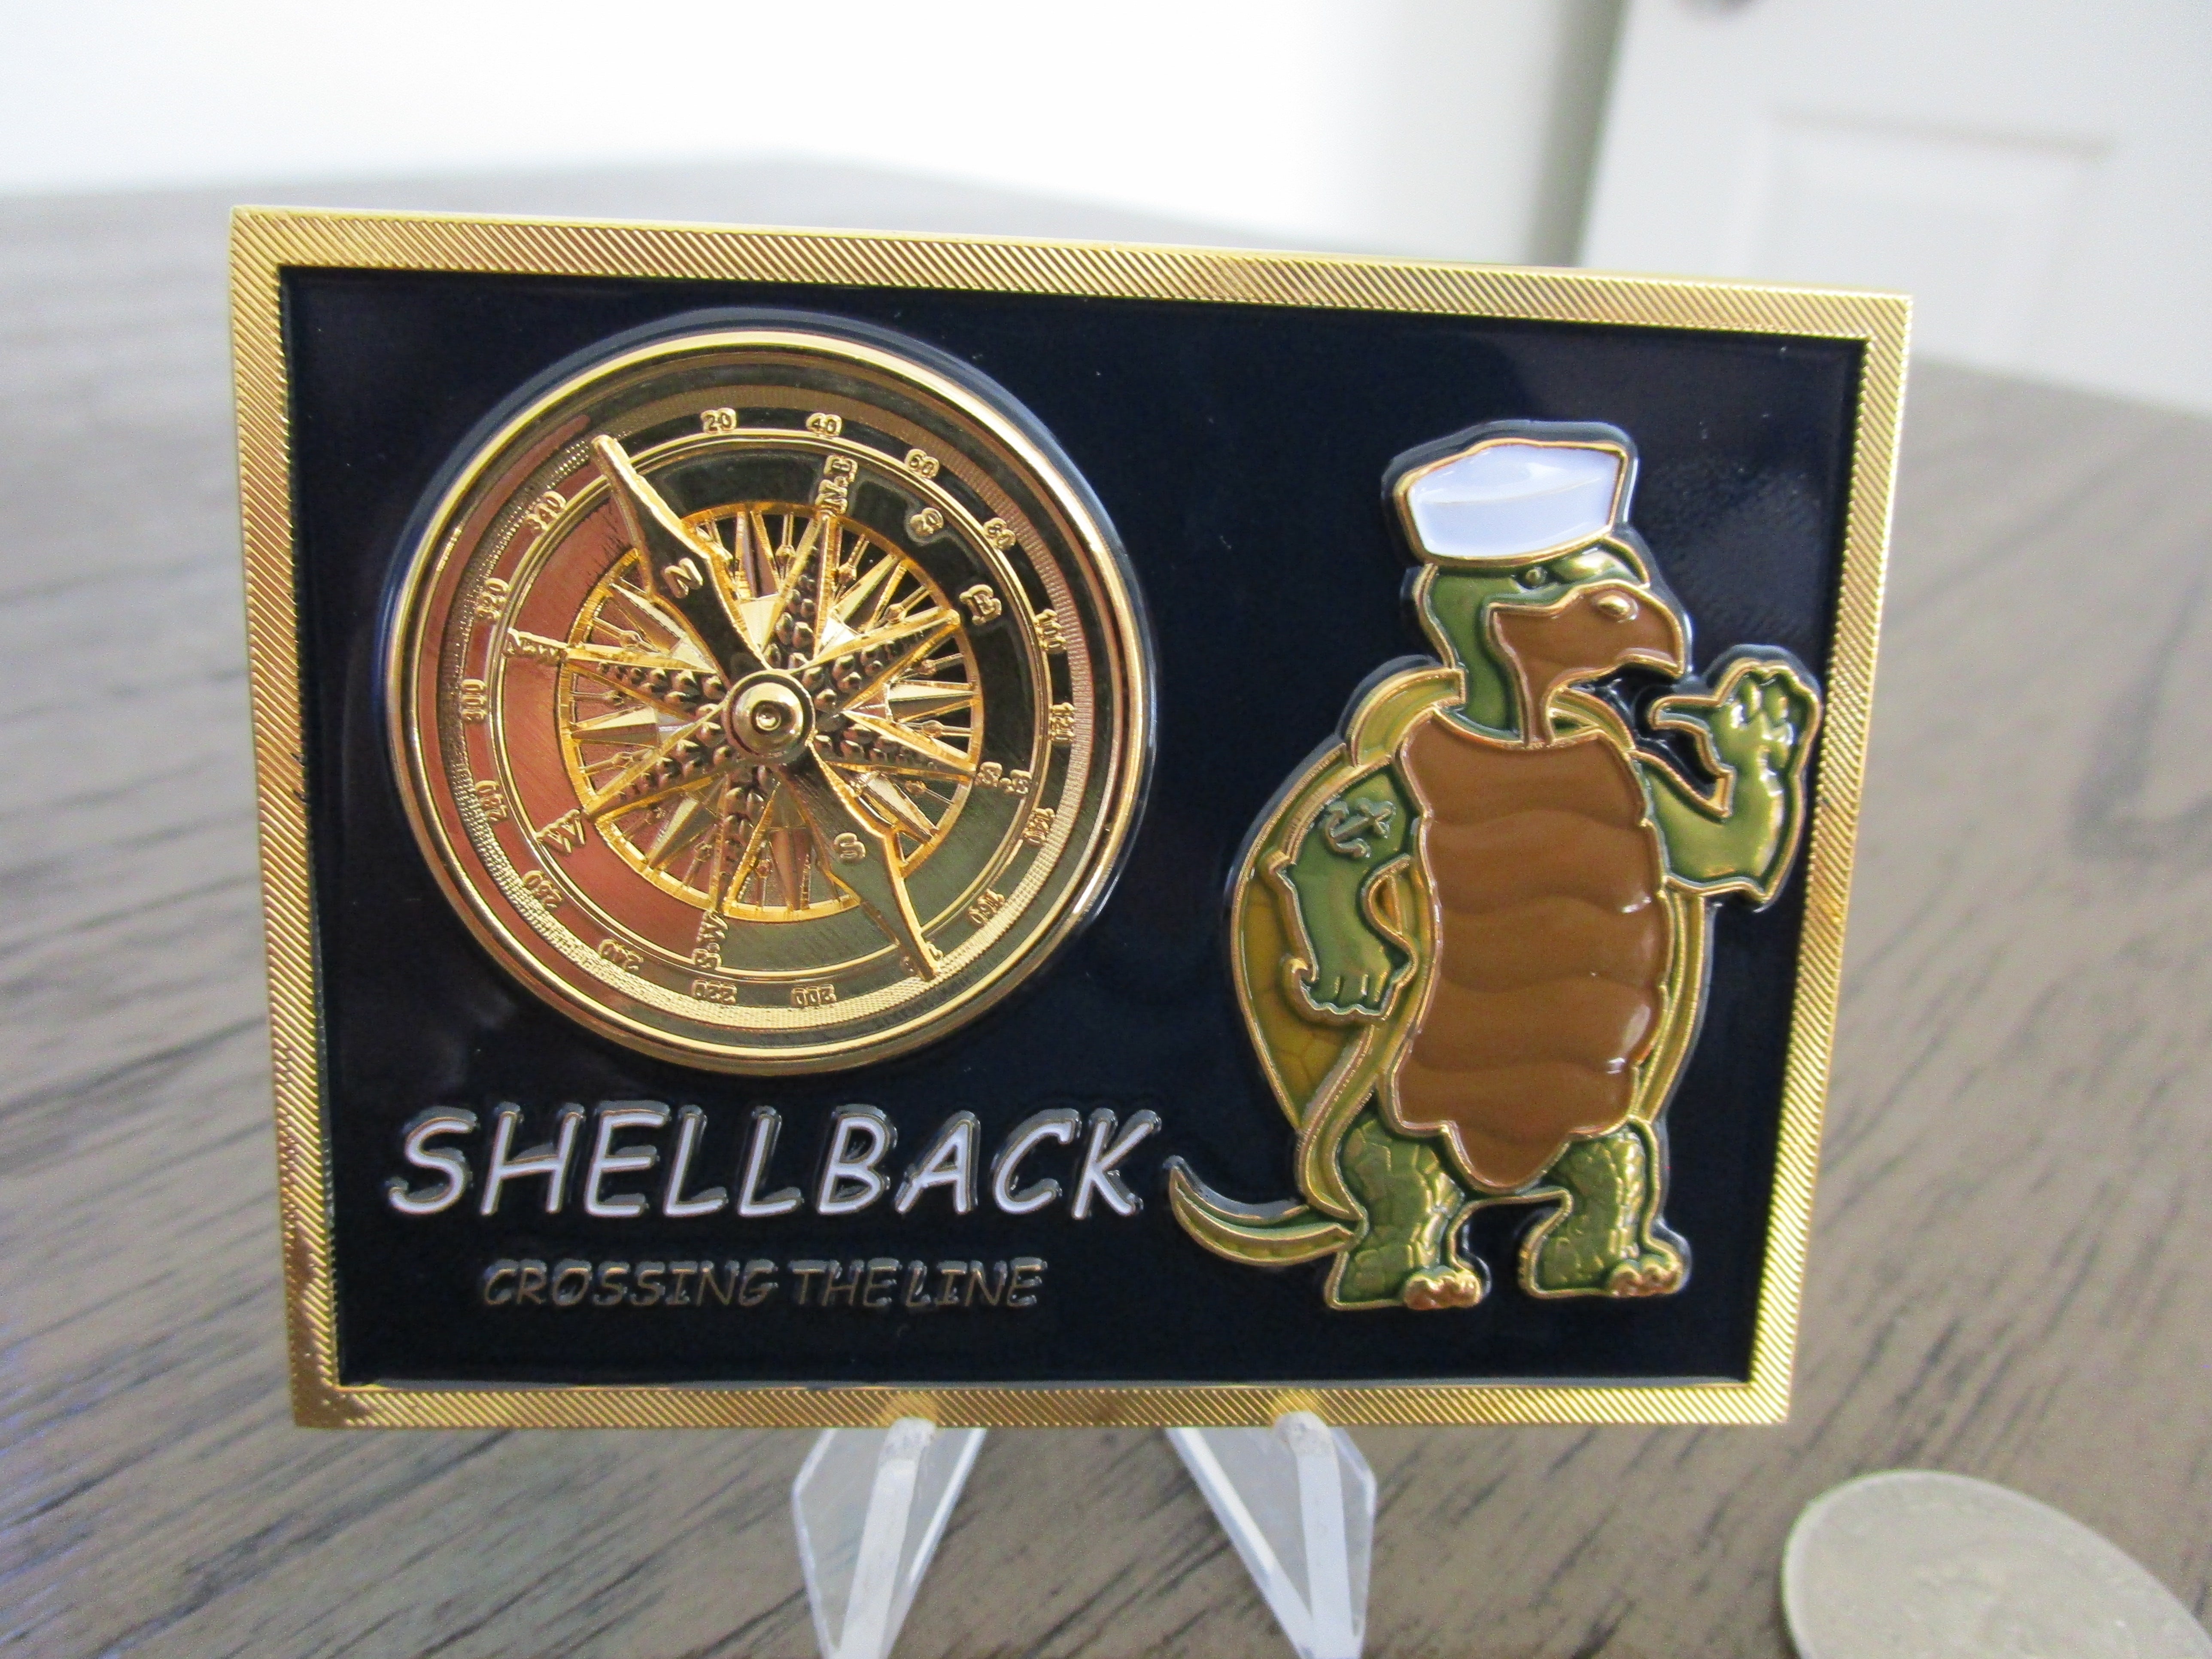 Shellback Crossing The Line Ancient Order of the Deep Crossing The Equator Ceremonial USMC USN Challenge Coin